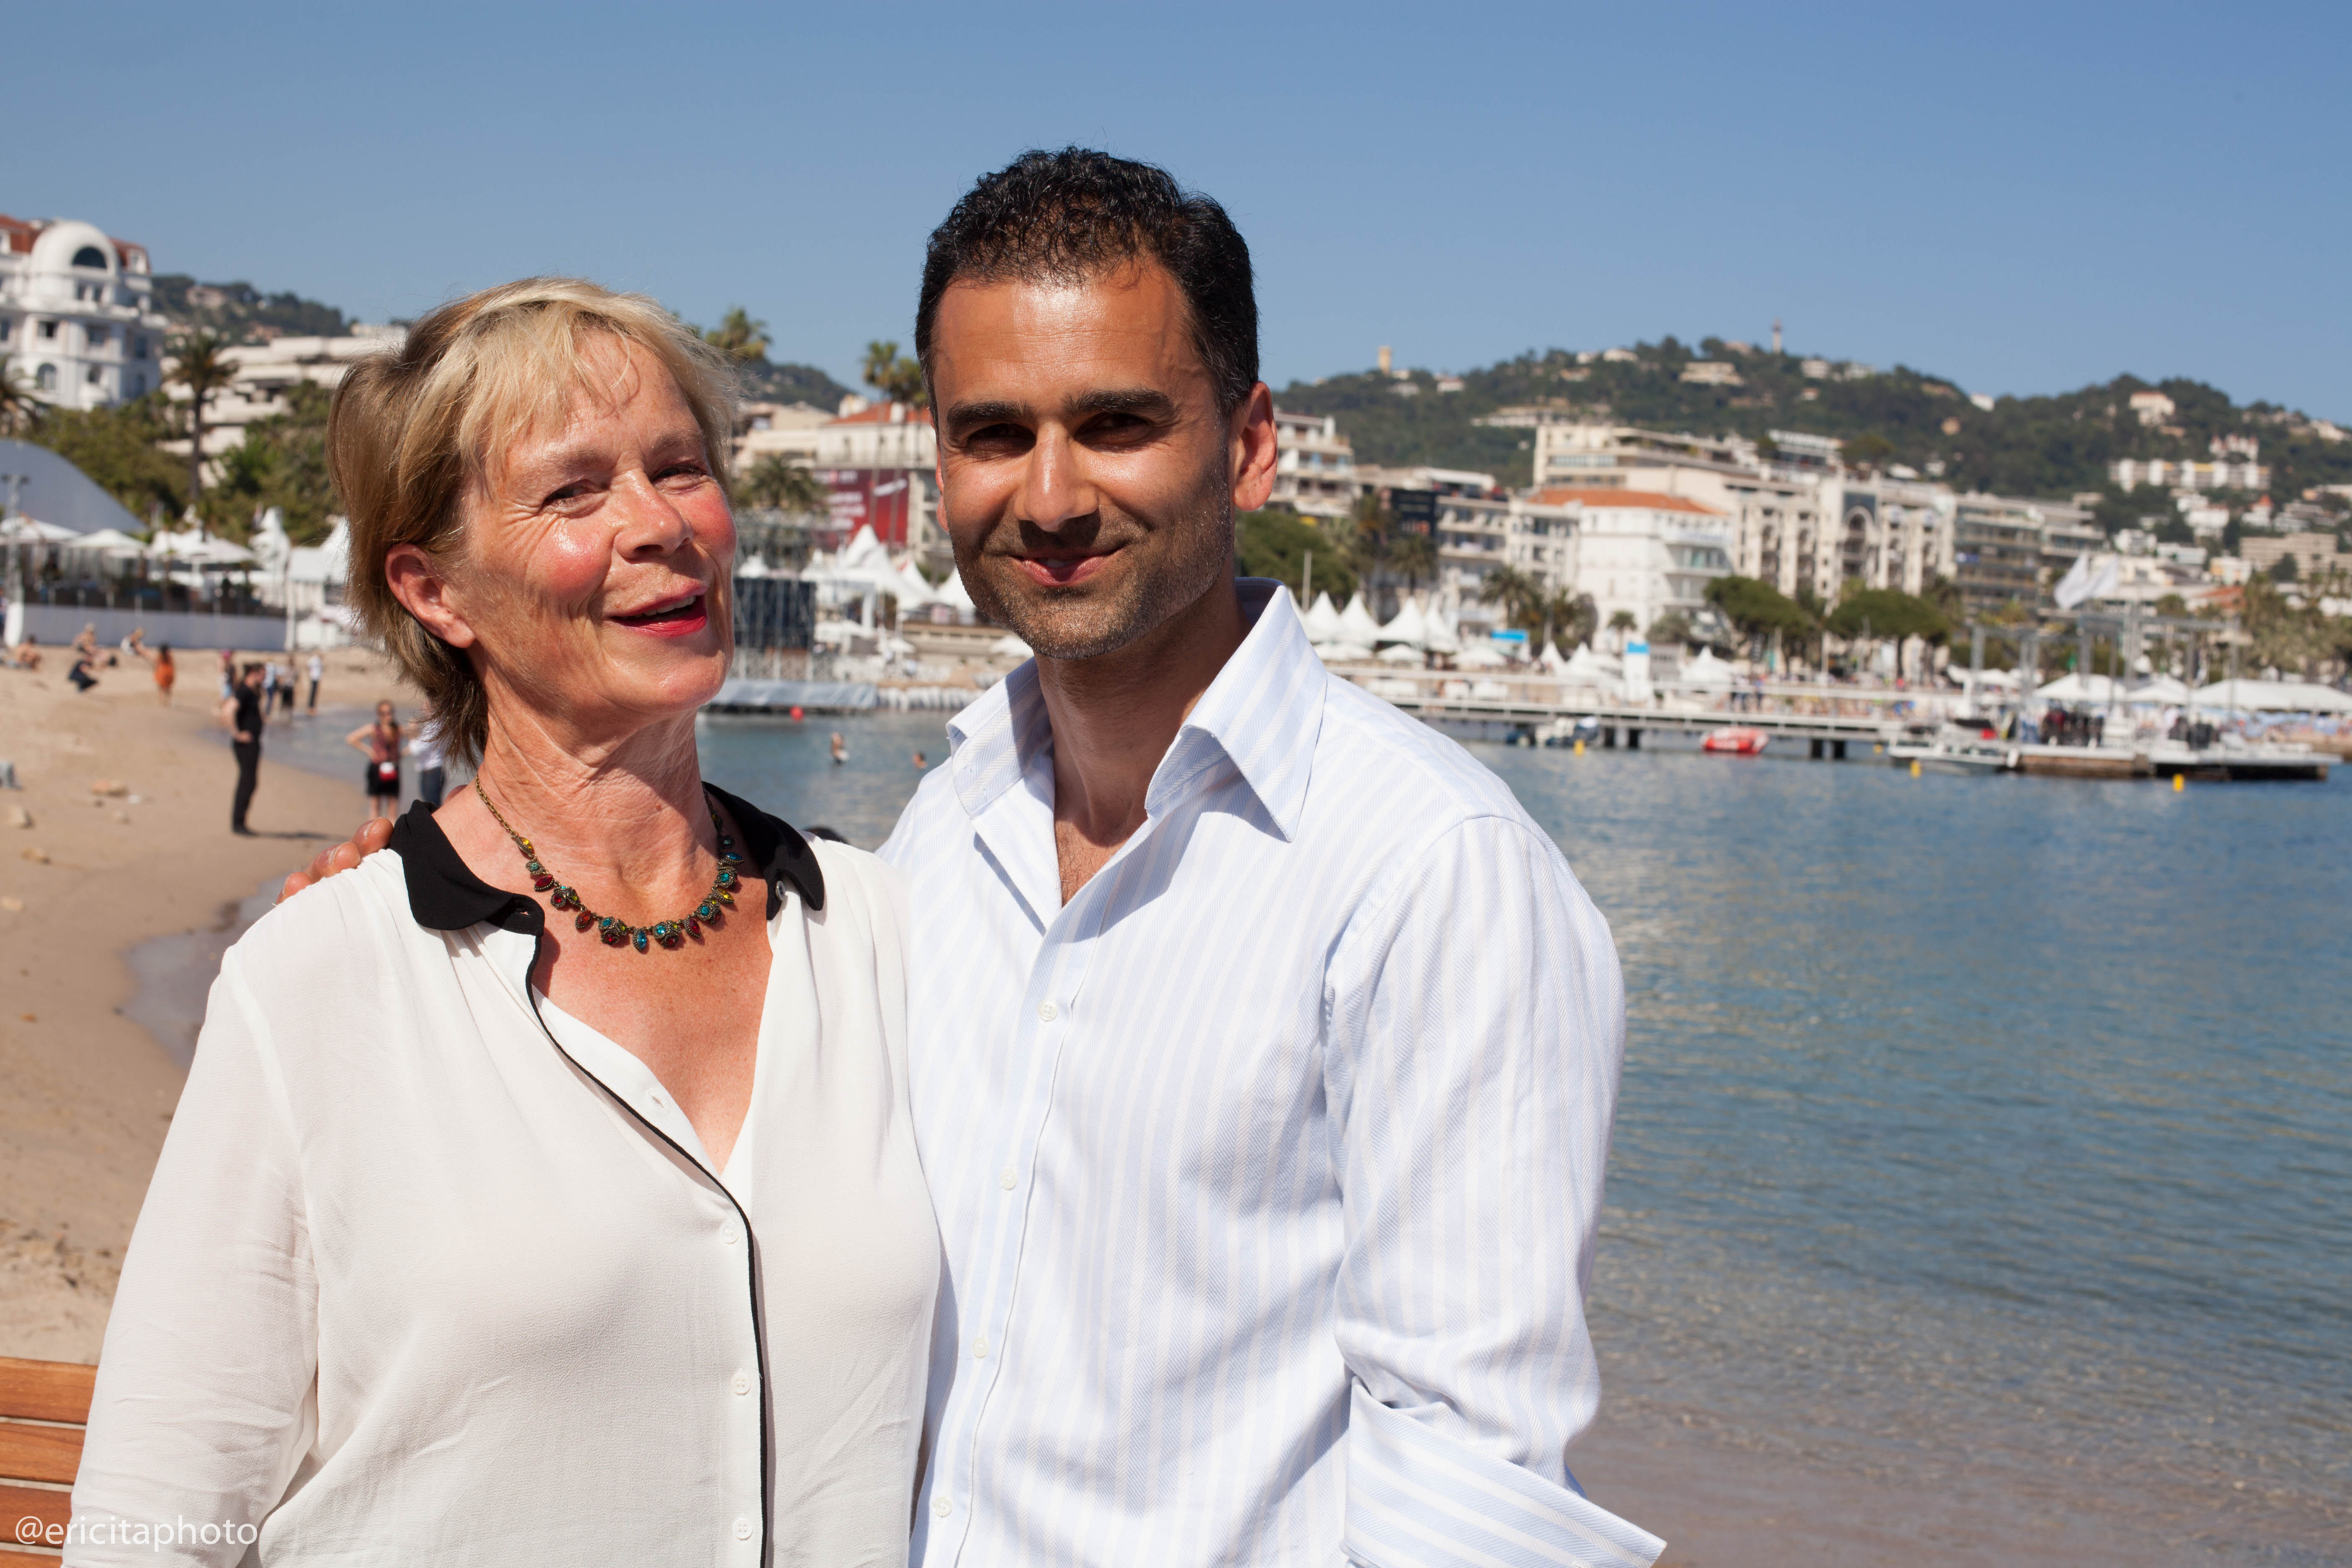 Malik having some down time with the delectable Celia Imri at Cannes